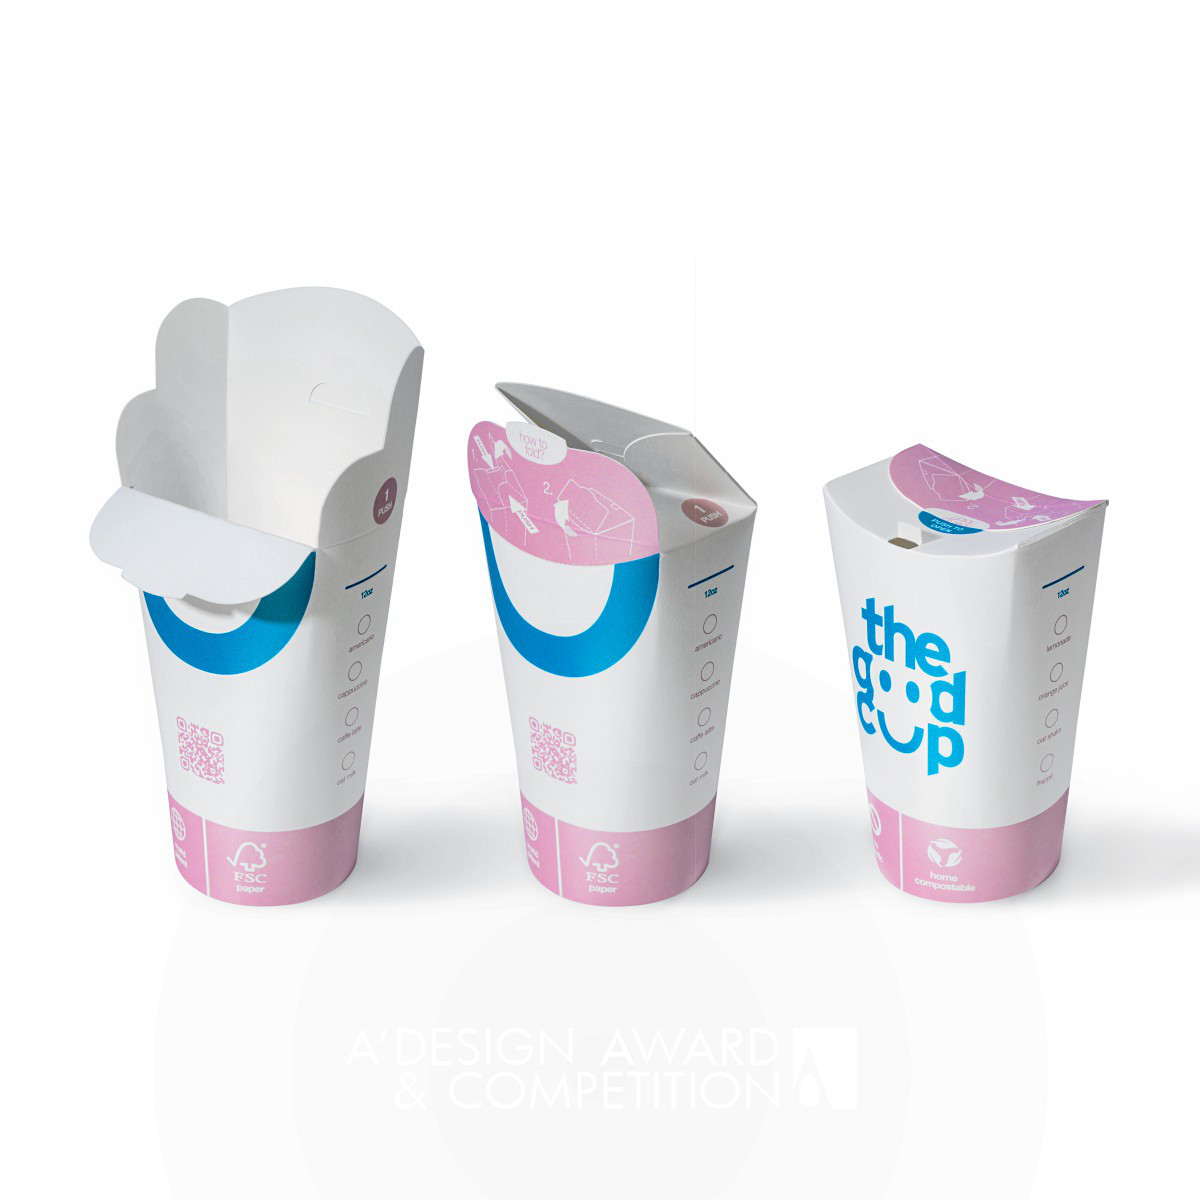 The Good Cup <b>Sustainable Packaging